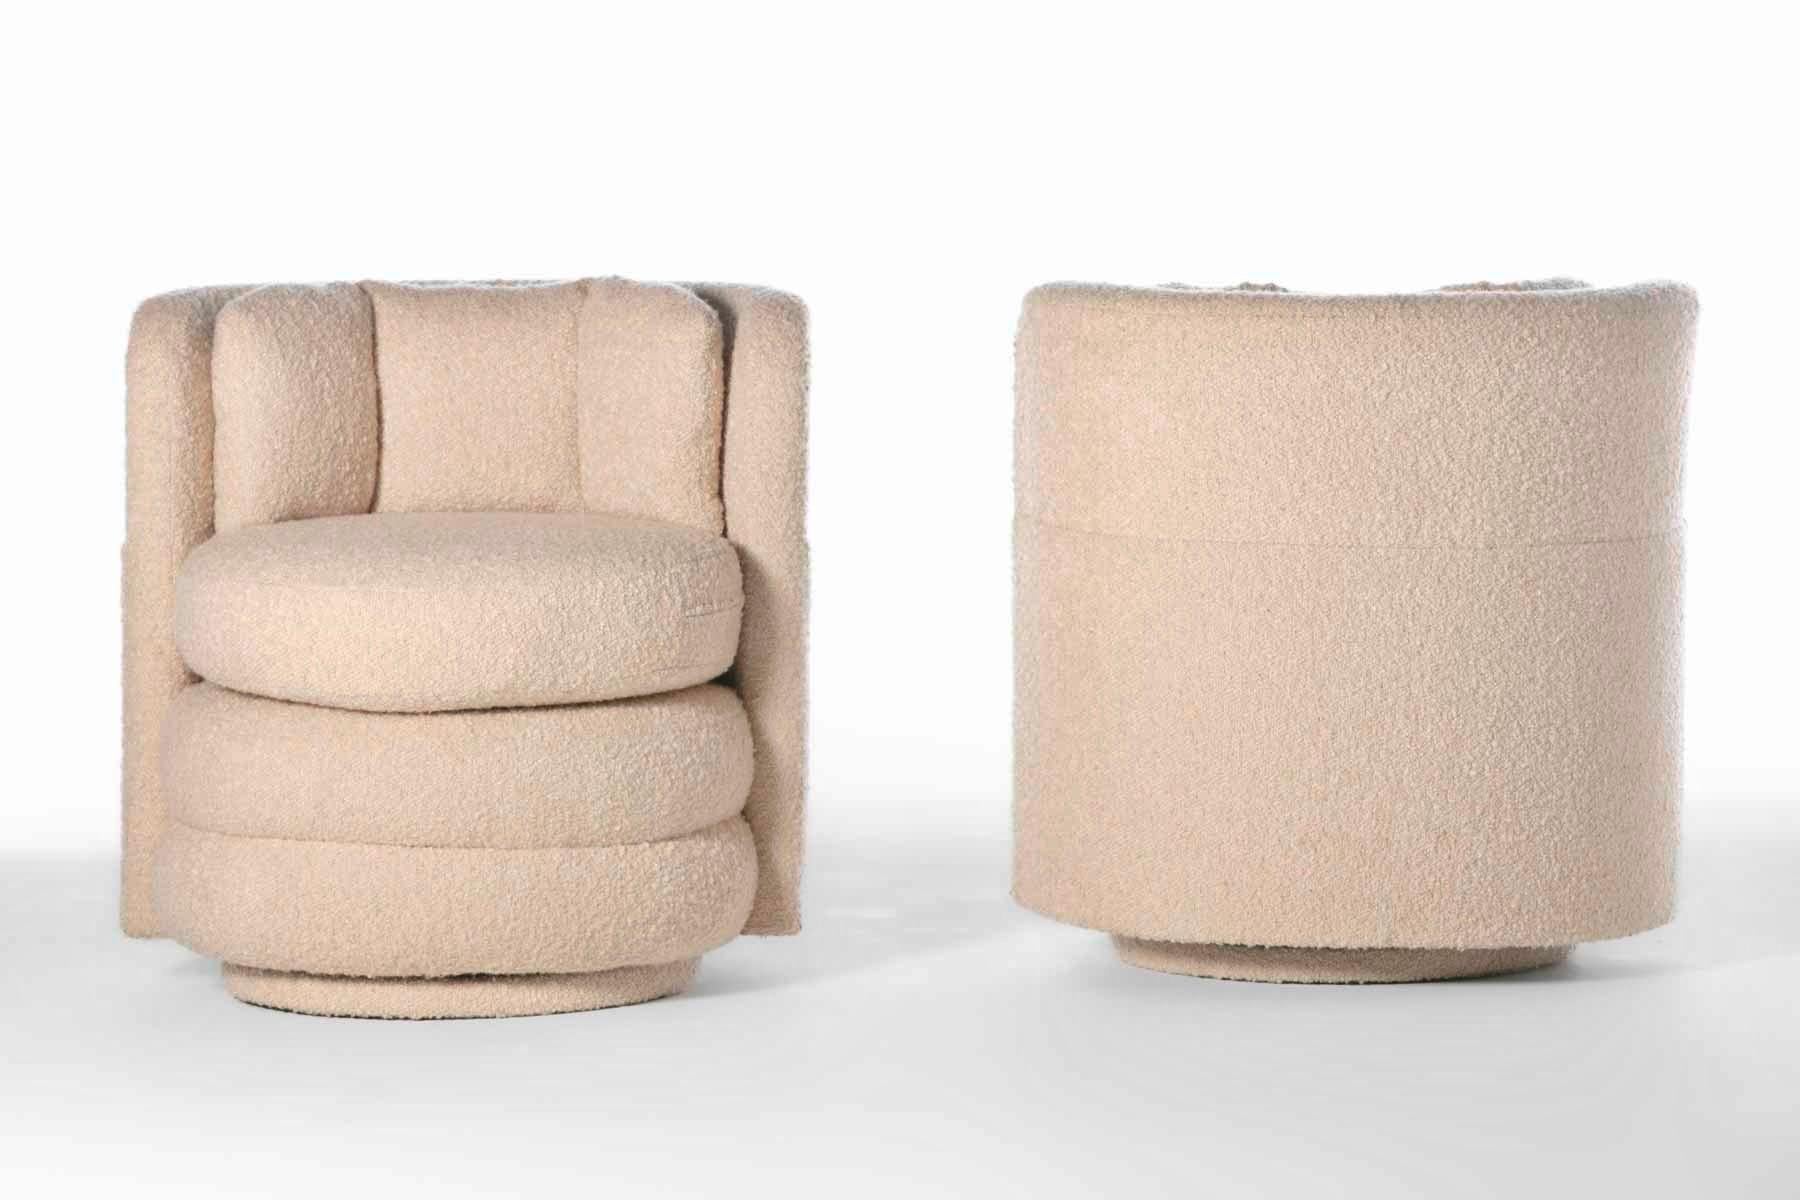 Pair of Post Modern Channeled Swivel Chairs in Blush Pink Bouclé In Good Condition For Sale In Saint Louis, MO